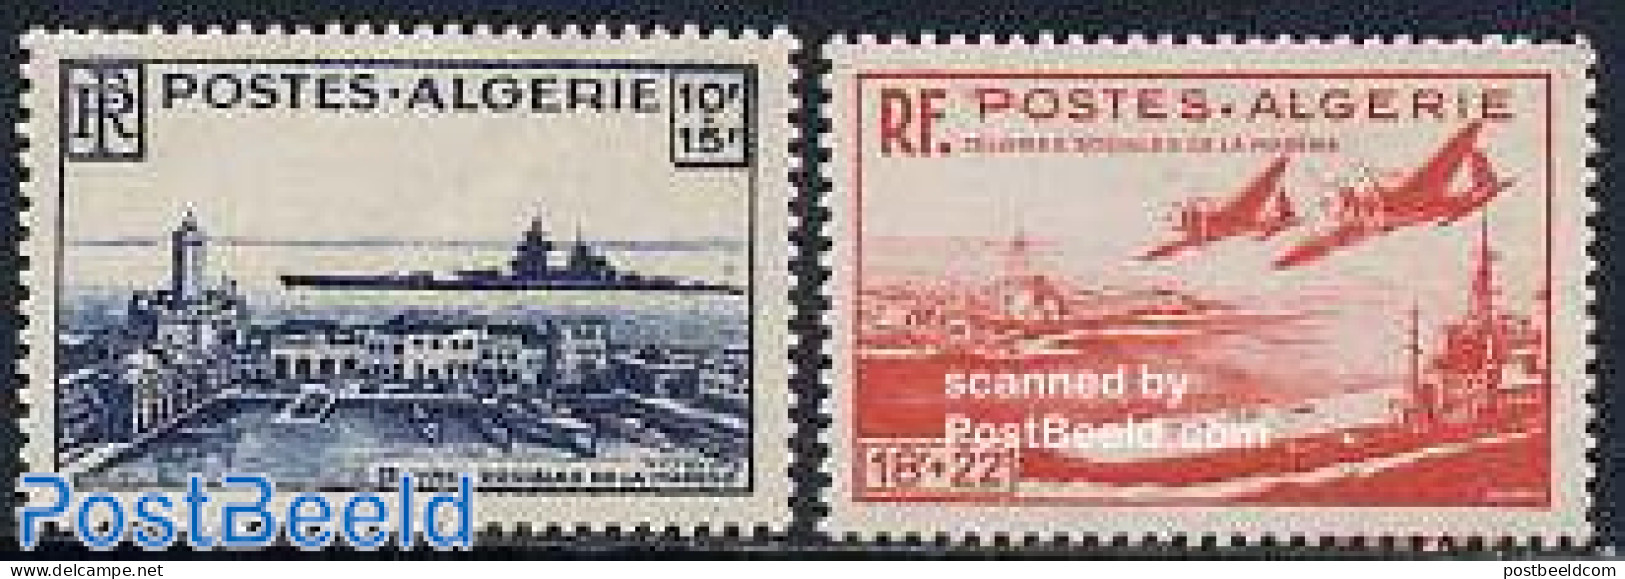 Algeria 1949 Navy 2v, Unused (hinged), Transport - Various - Aircraft & Aviation - Ships And Boats - Lighthouses & Saf.. - Neufs